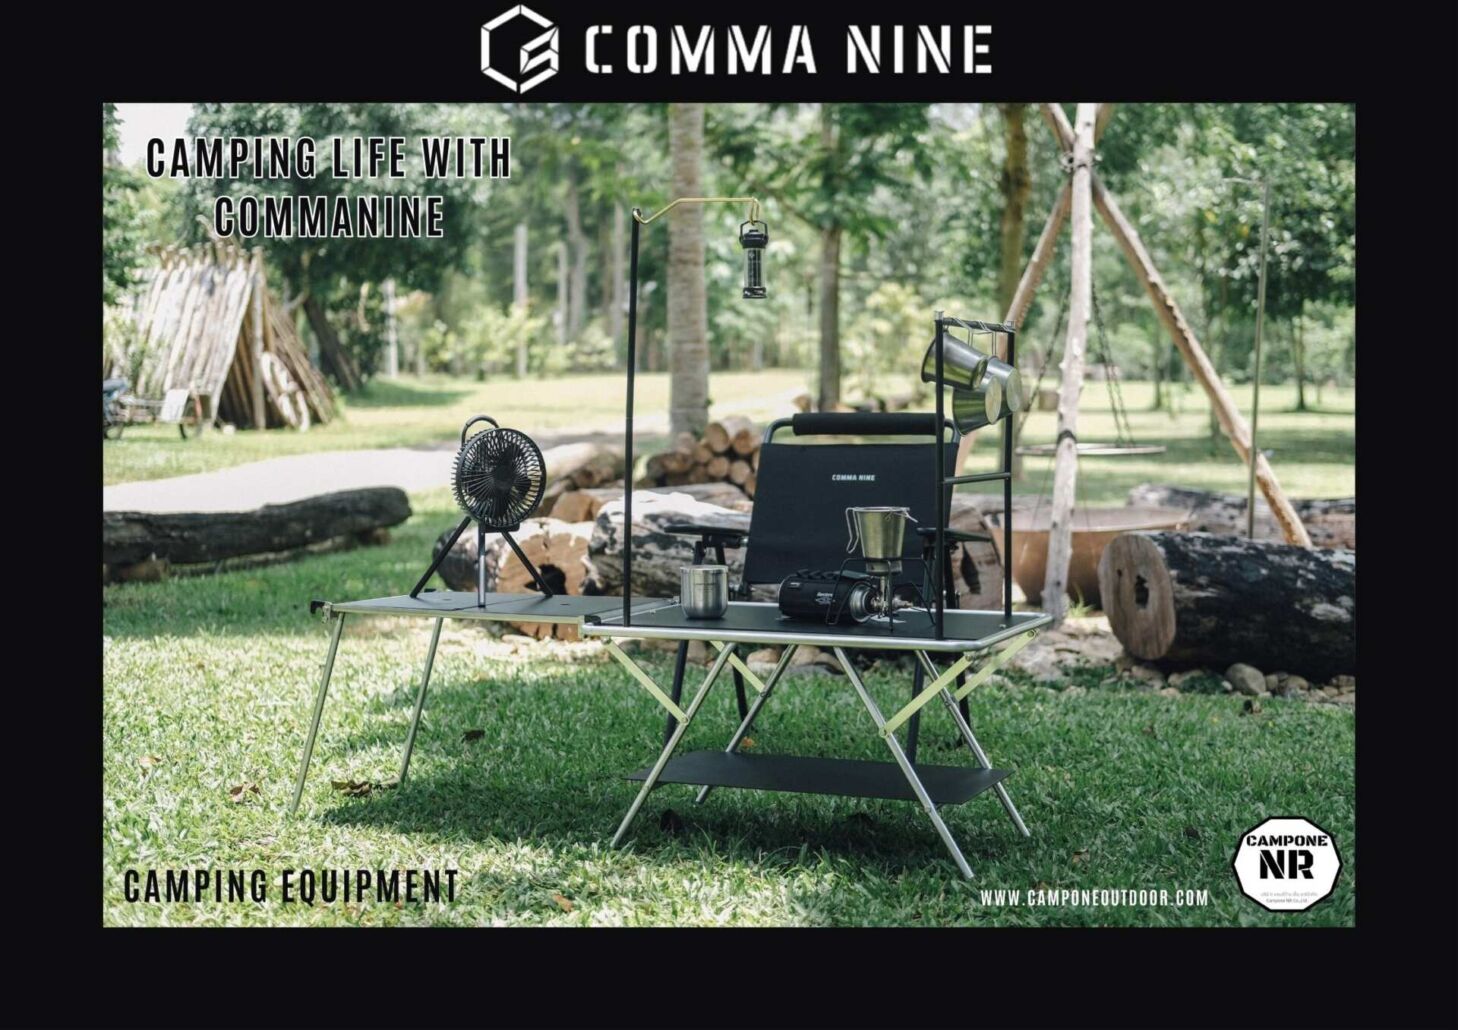 Camping Life with Comma nine